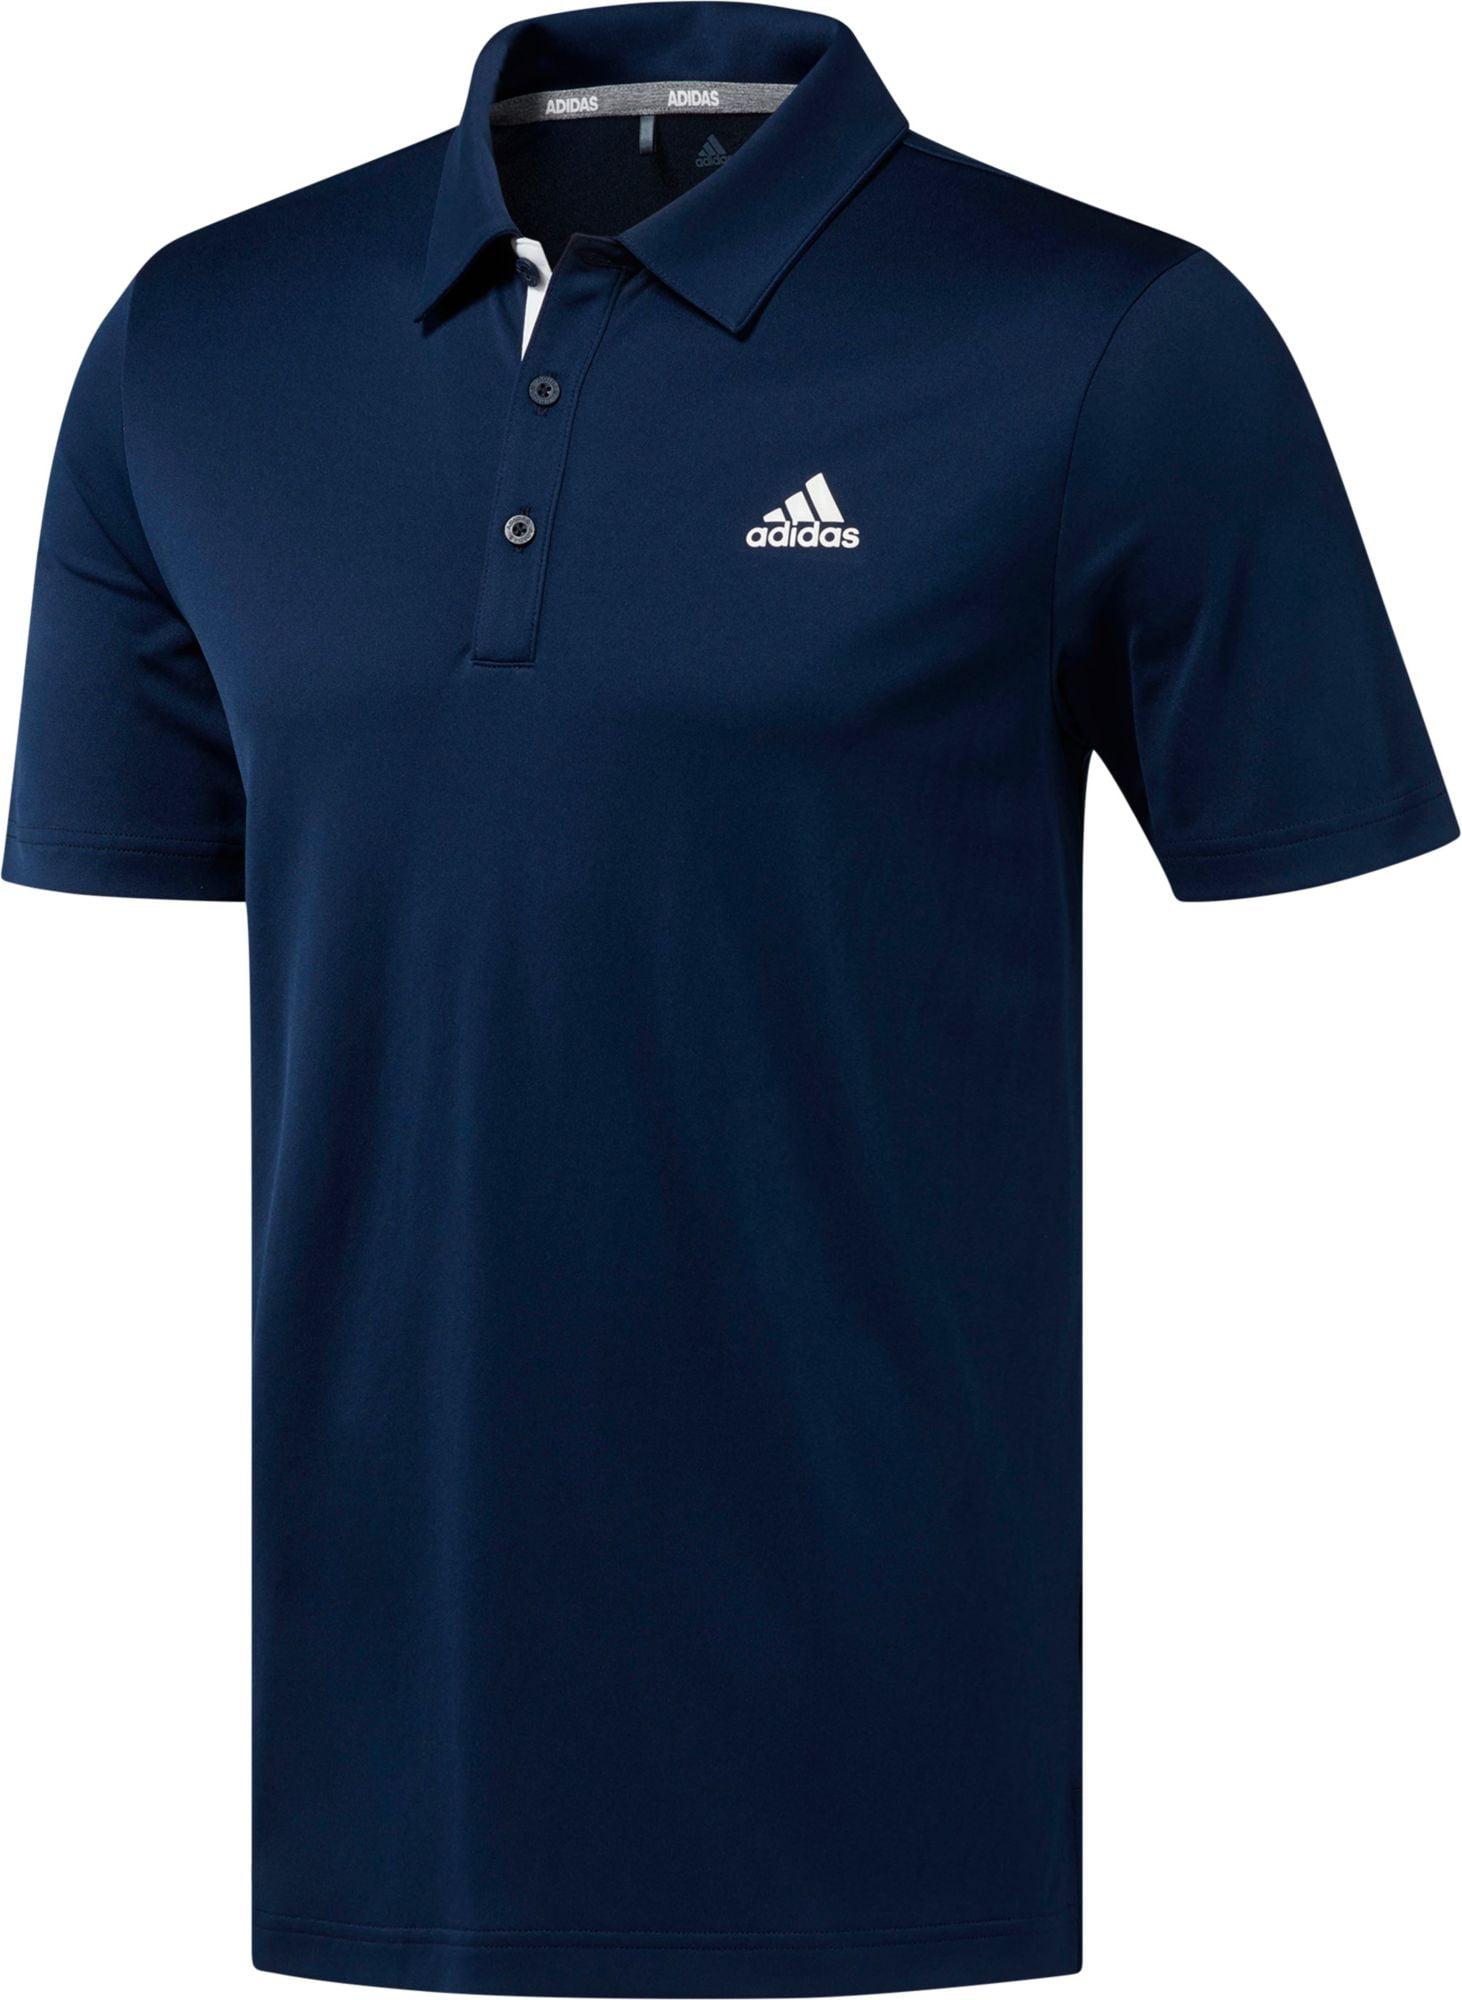 adidas men's drive novelty solid golf polo